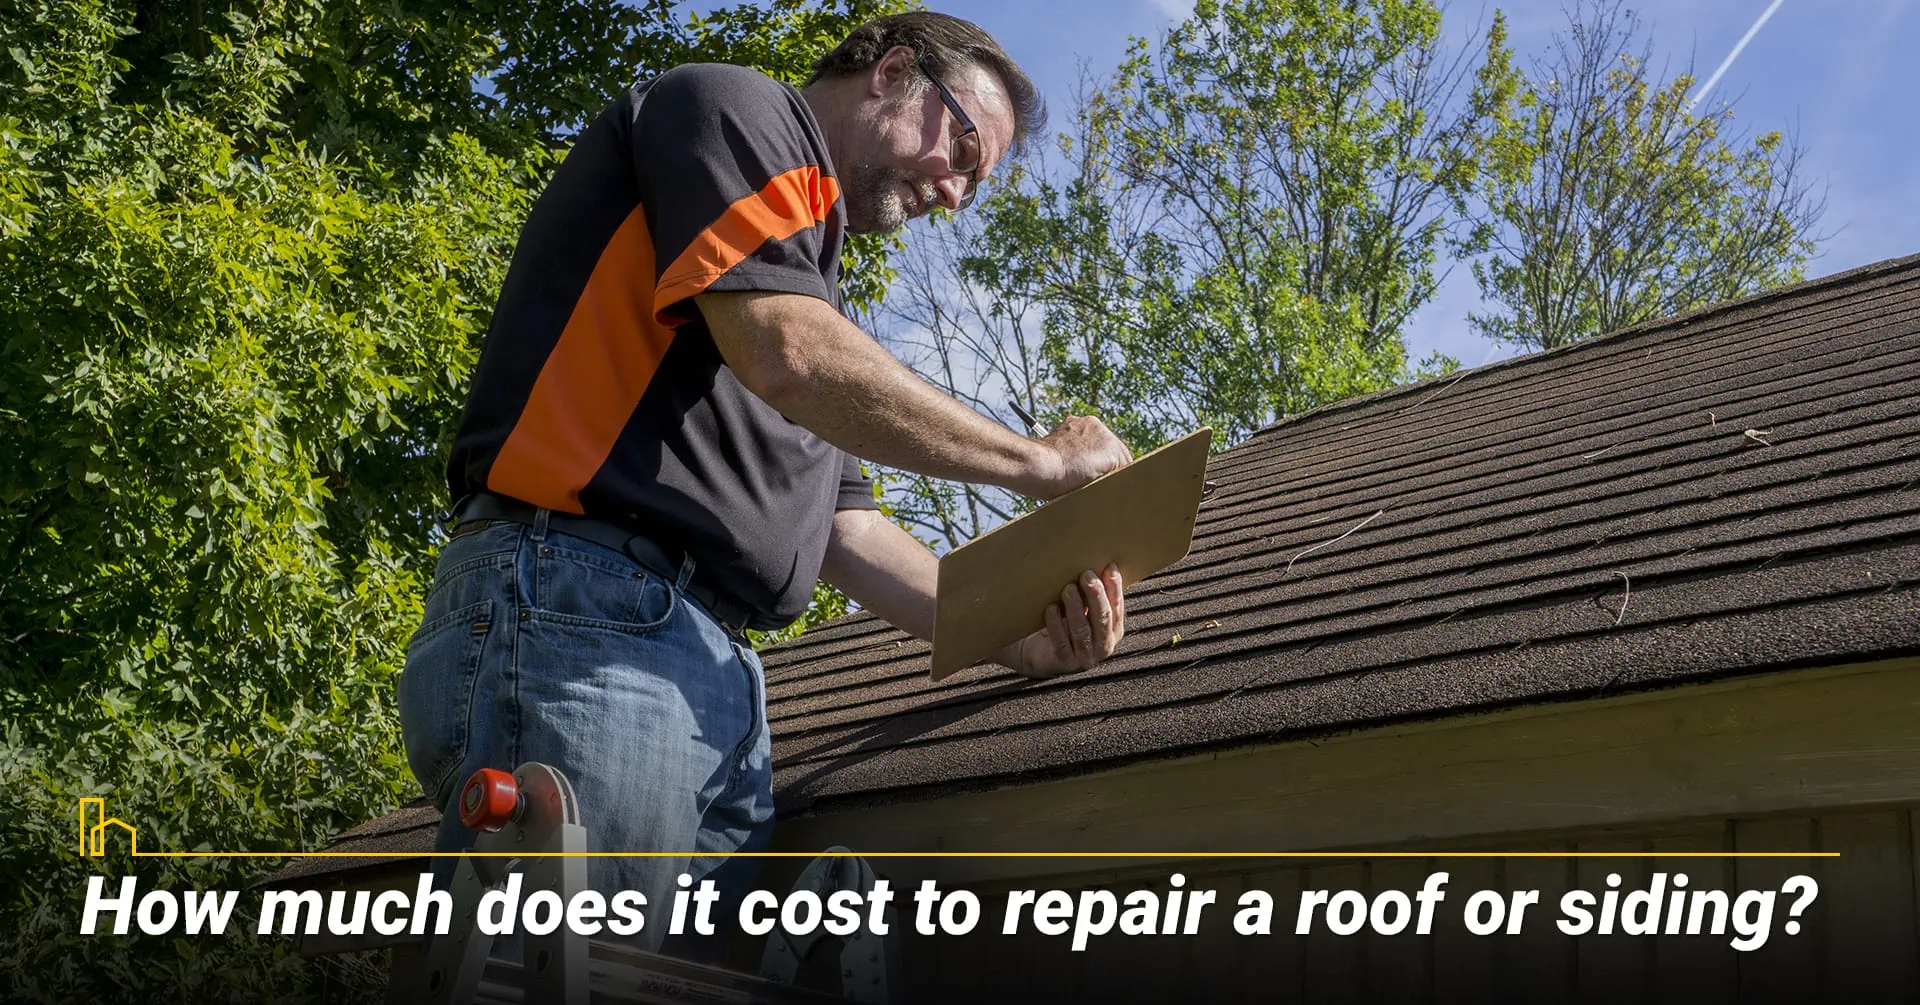 IV. How much does it cost to repair a roof or siding?